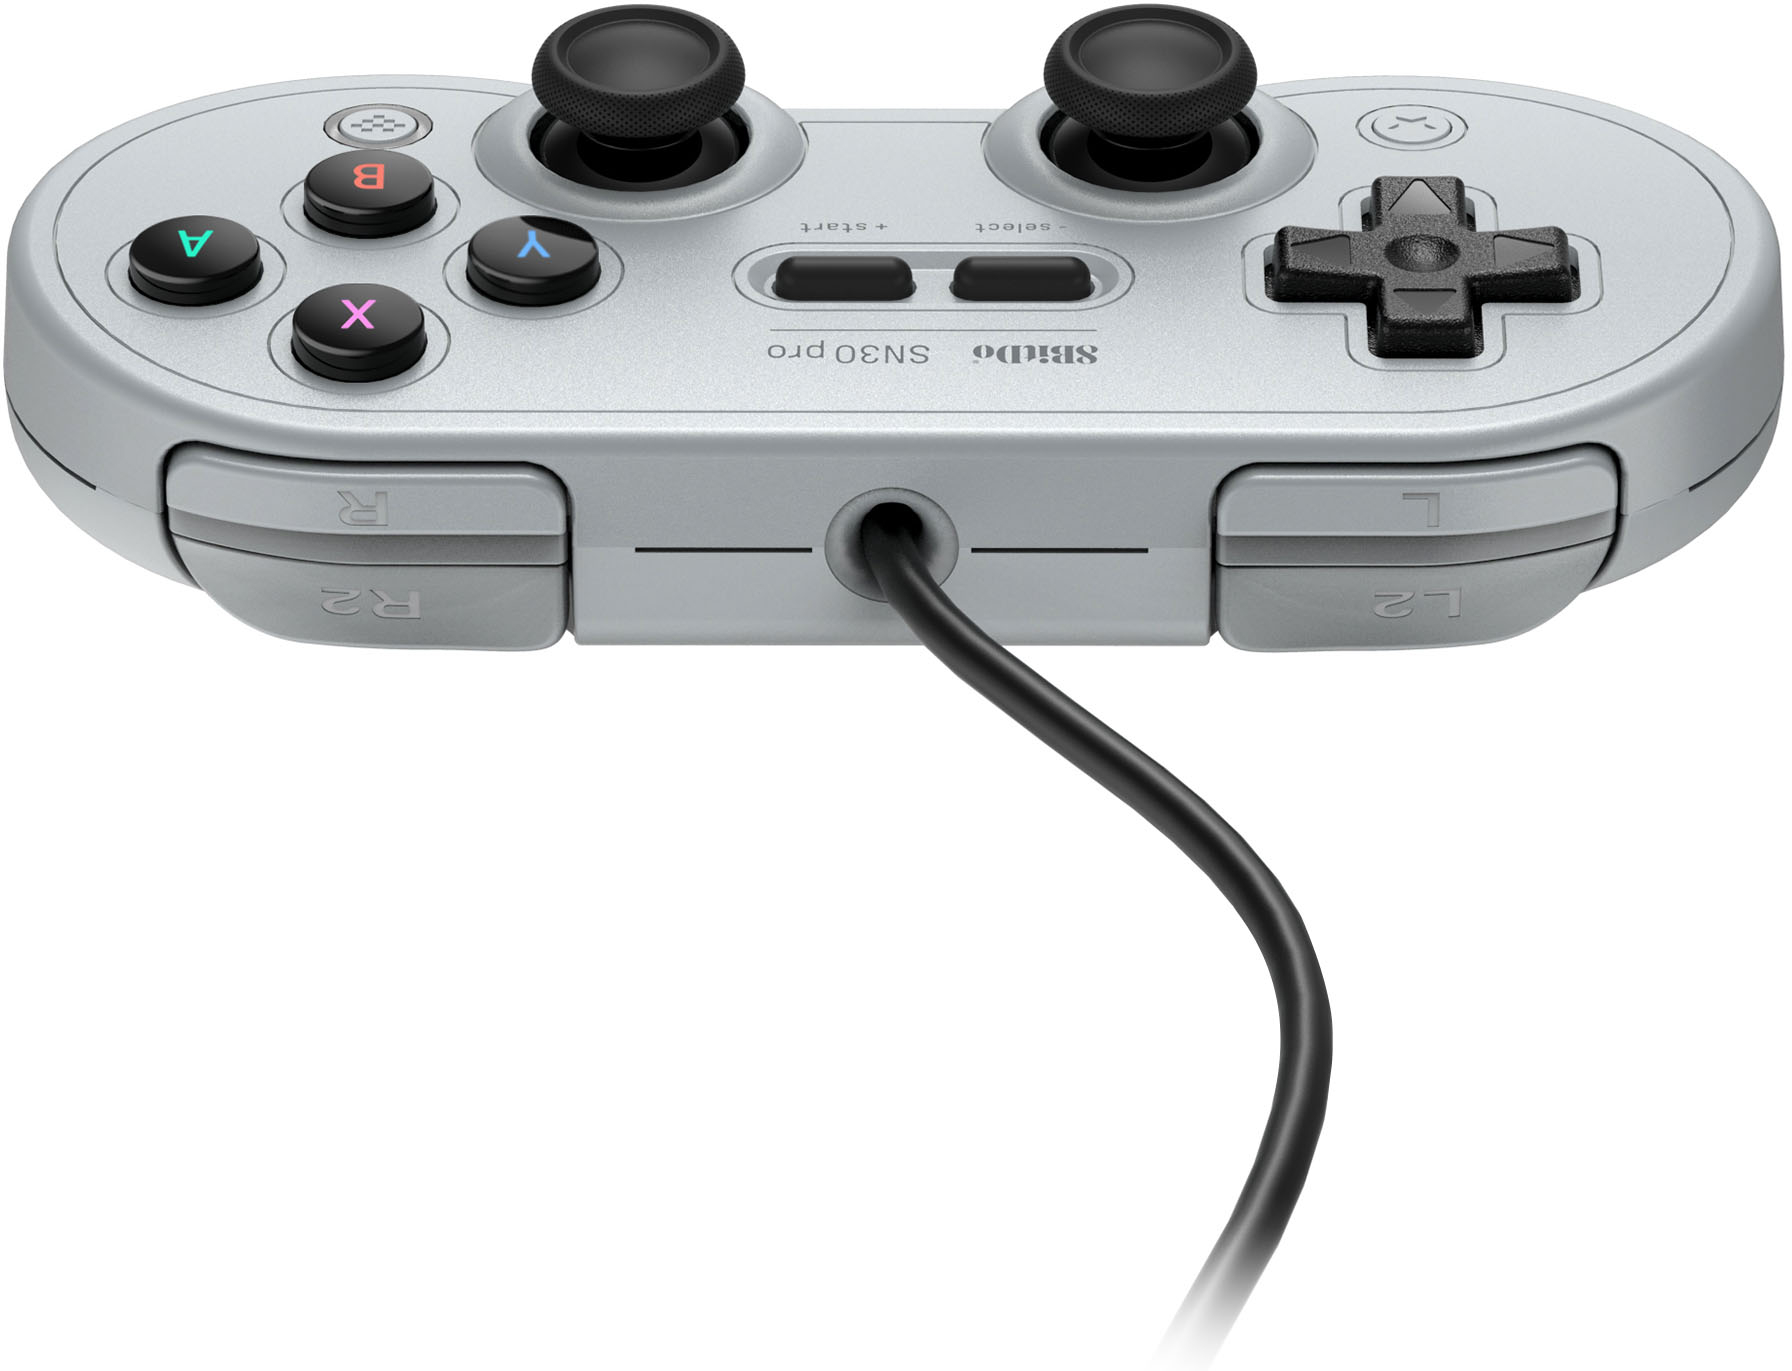 8Bitdo SN30 Pro Wireless Bluetooth Controller with Joysticks,USB-C Cable  Gamepad for Mac PC Android Switch Windows MacOS SteamWhite 